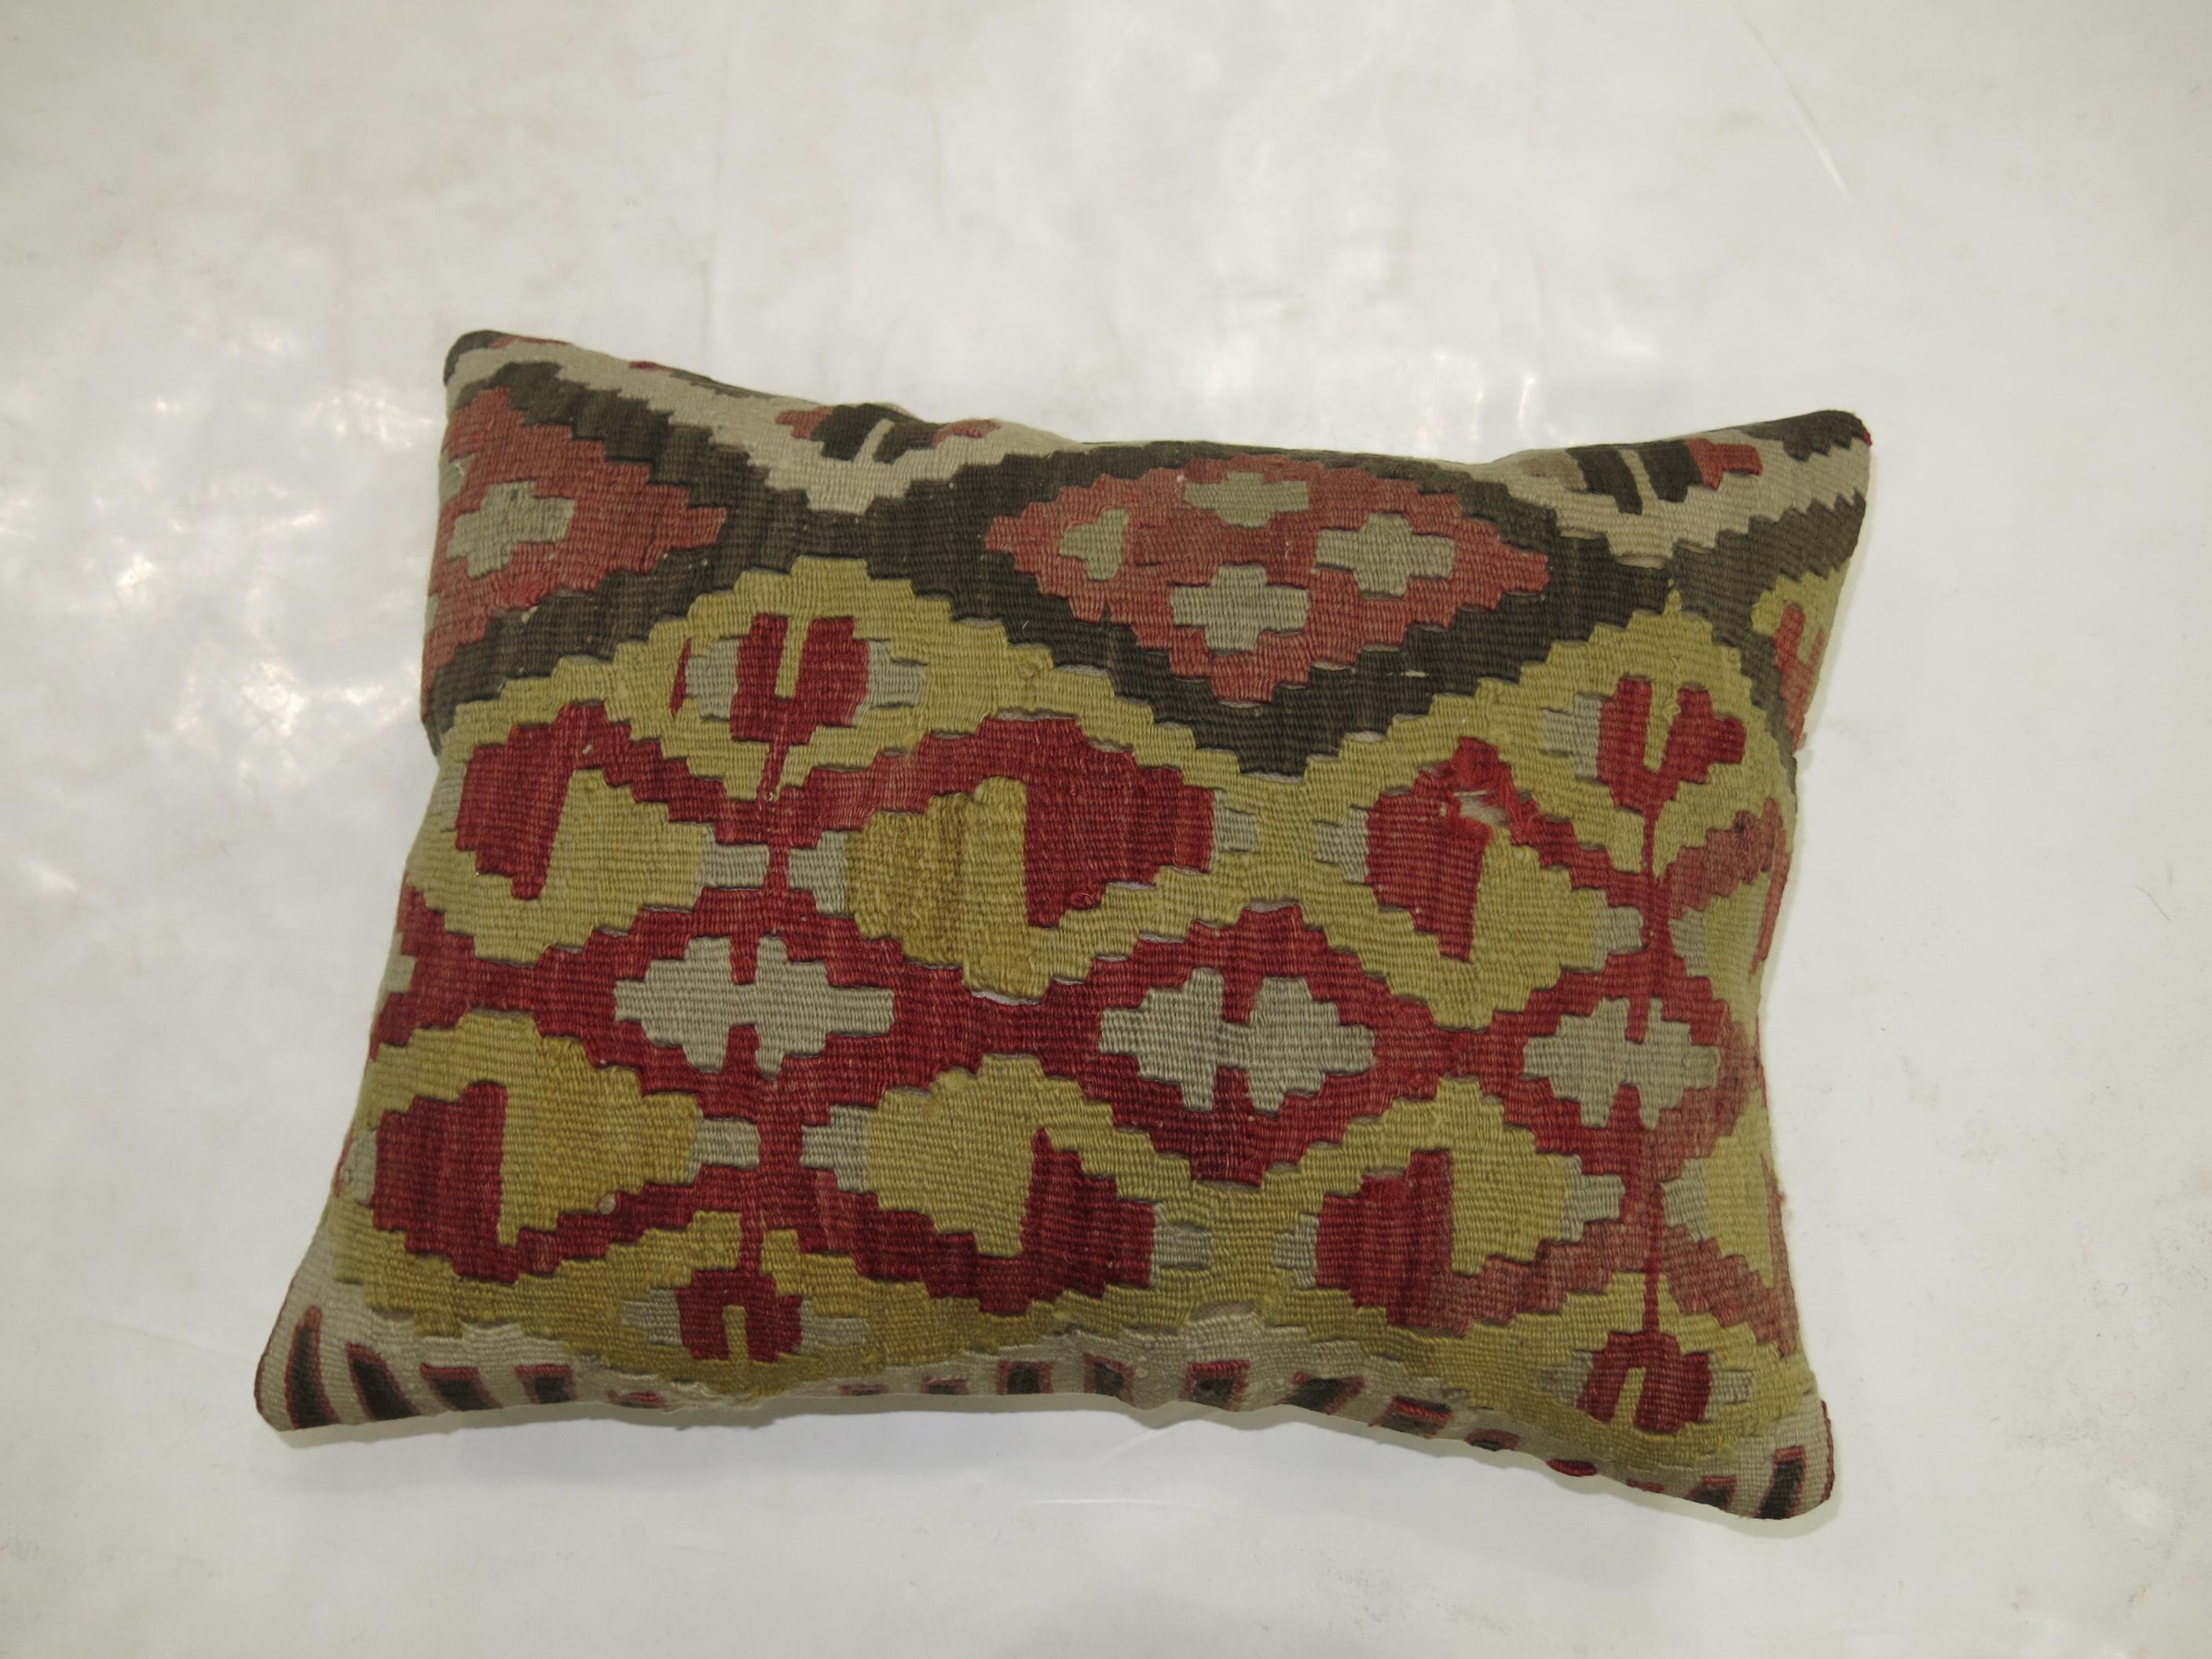 Pillow made from a vintage Turkish kilim with cotton back. Zipper closure and foam insert provided. 
Measures: 15